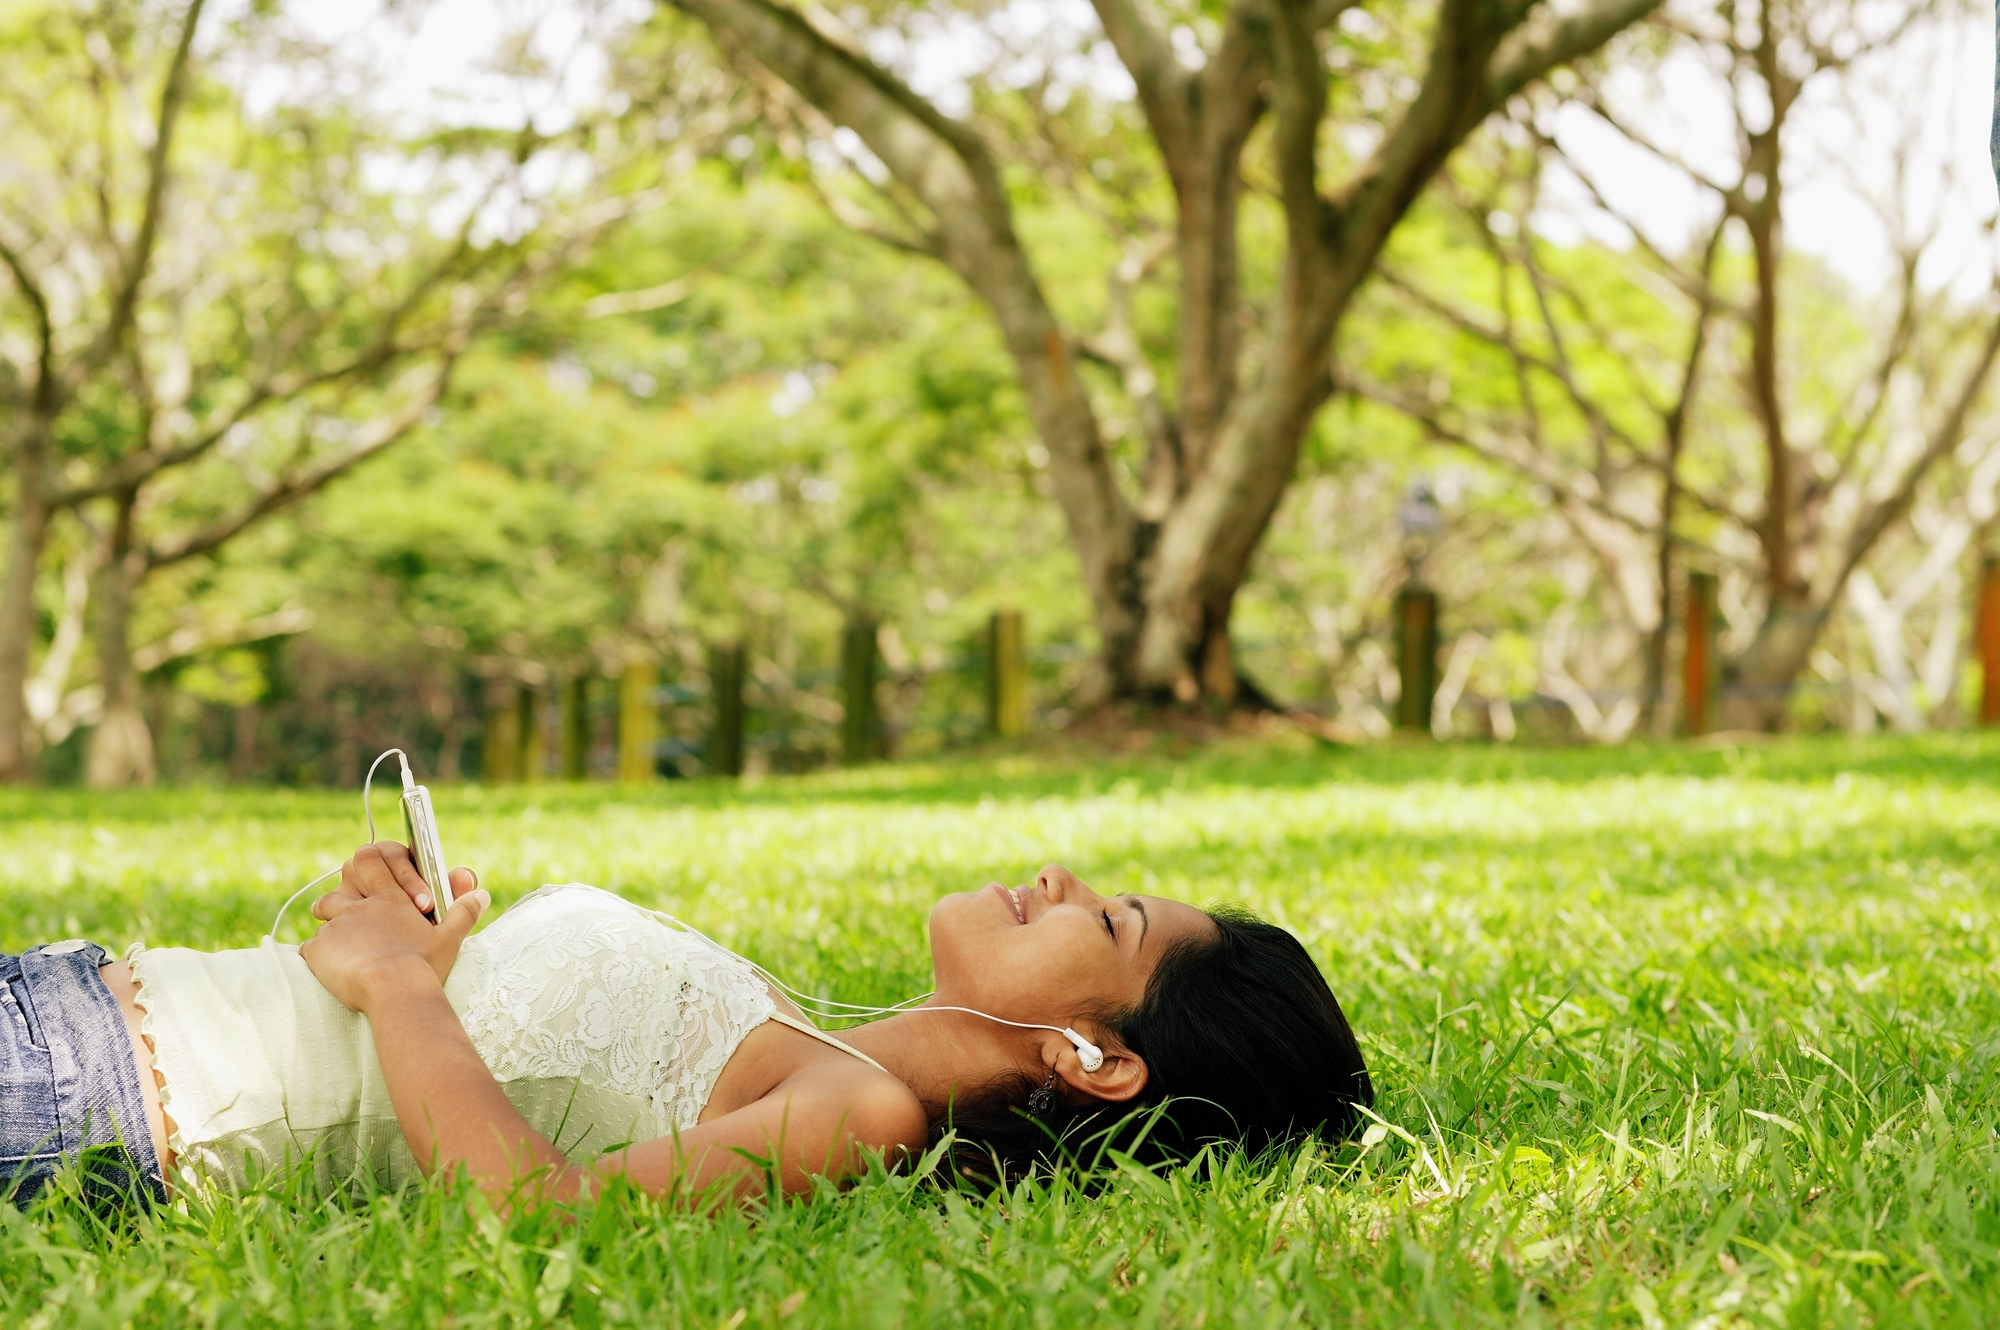 Self hypnosis for weight loss - a young woman listening to a music device with earbuds while laying on grass in a park